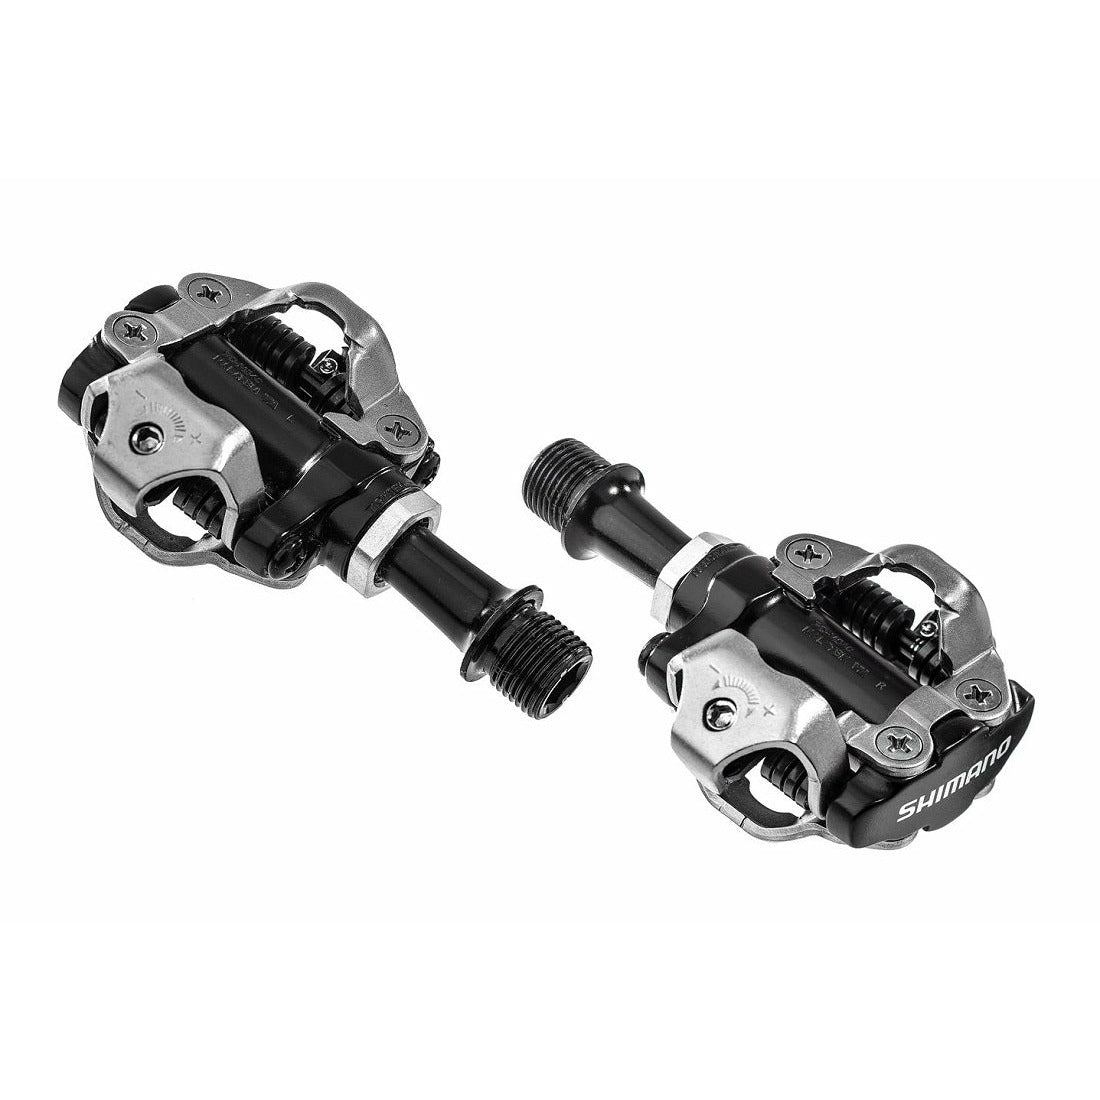 Shimano PD-M540 Pedals Shimano SPD M540 Clipless Pedal Set w Cleats Black